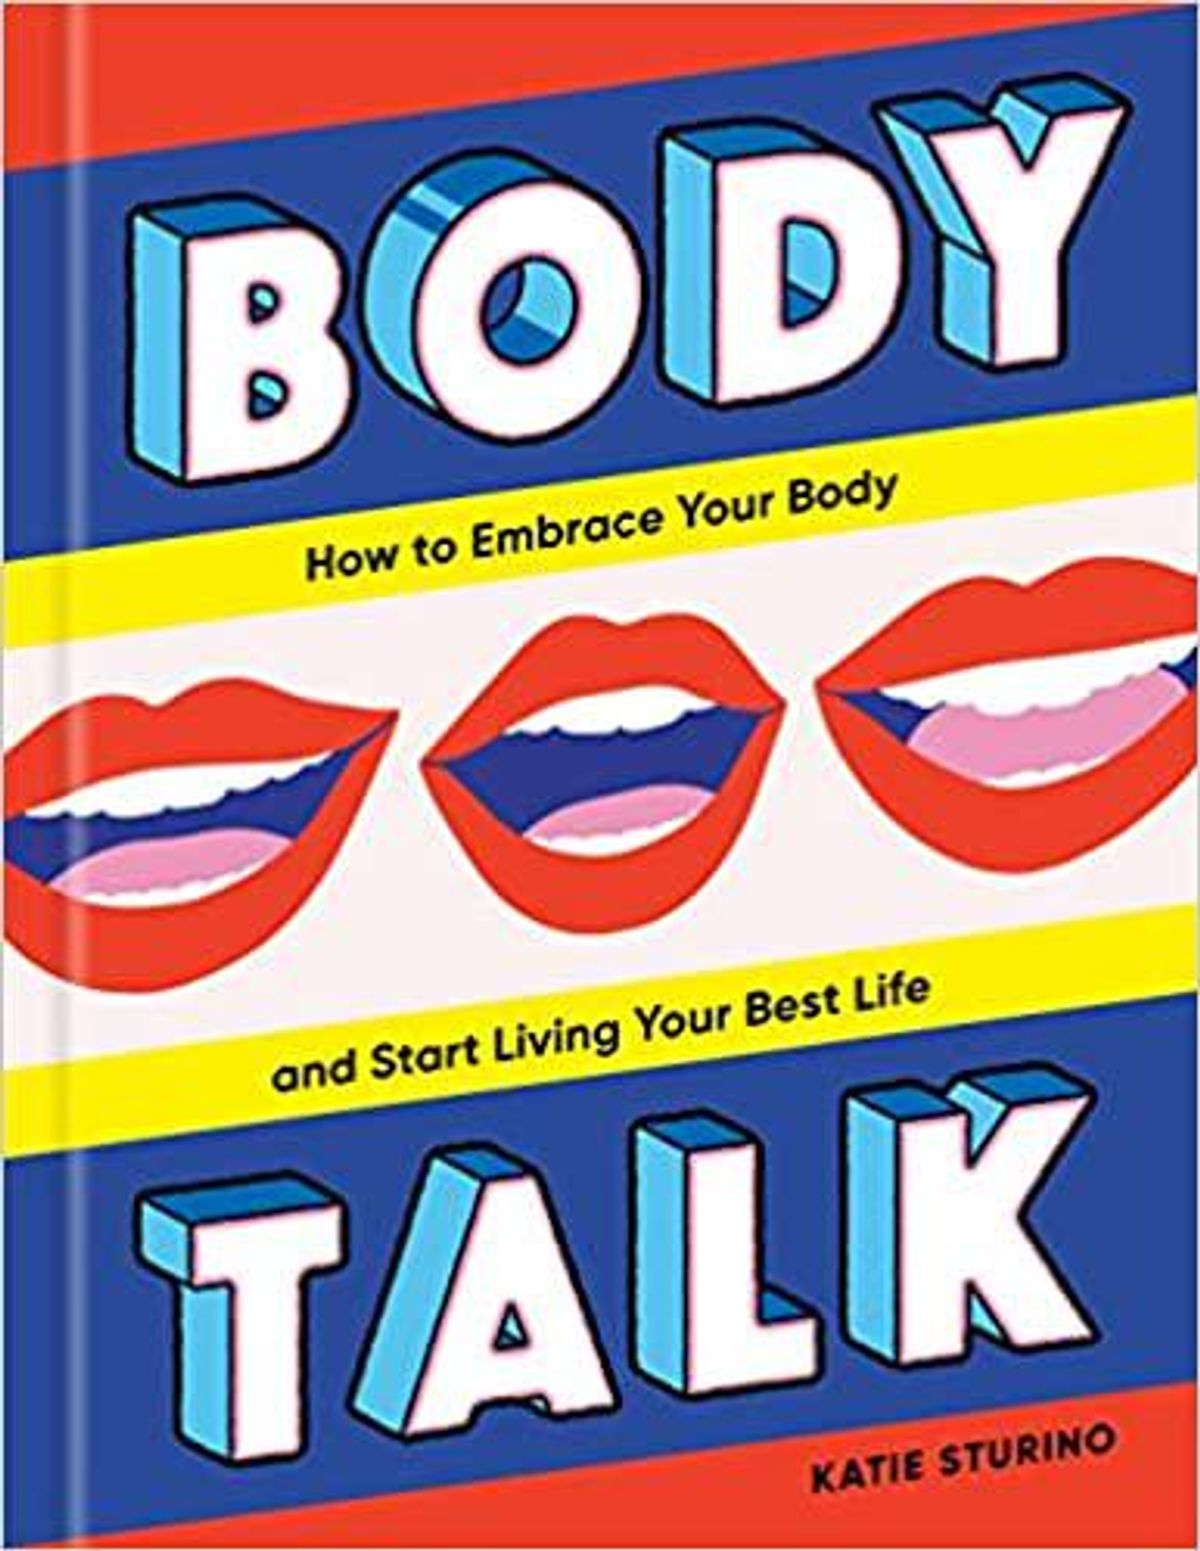 katie sturino body talk: how to embrace your body and start living your best life